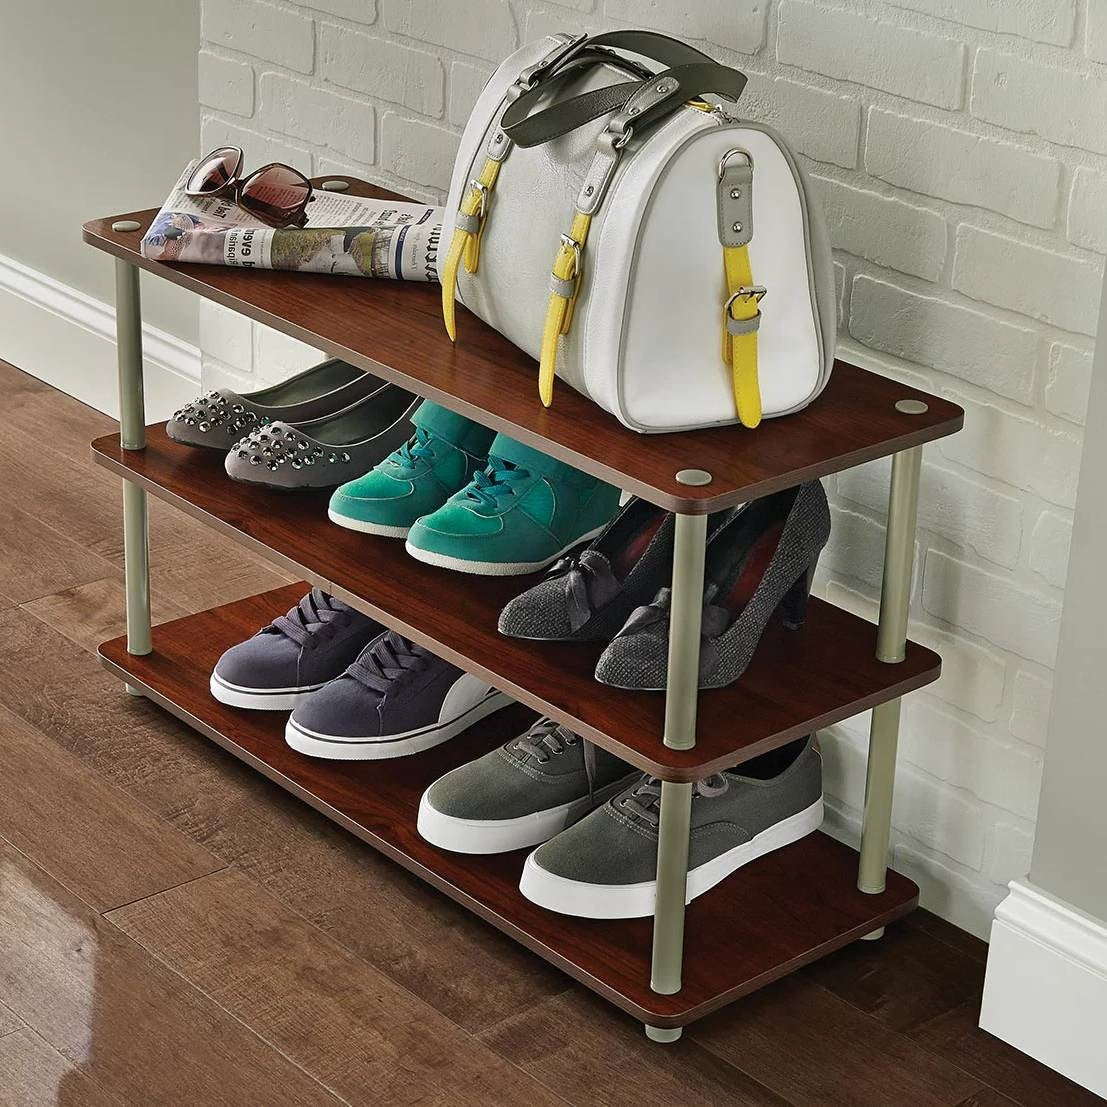 Accents > Shoe Racks - Dark Cherry 3-Shelf Modern Shoe Rack - Holds Up To 12 Pair Of Shoes